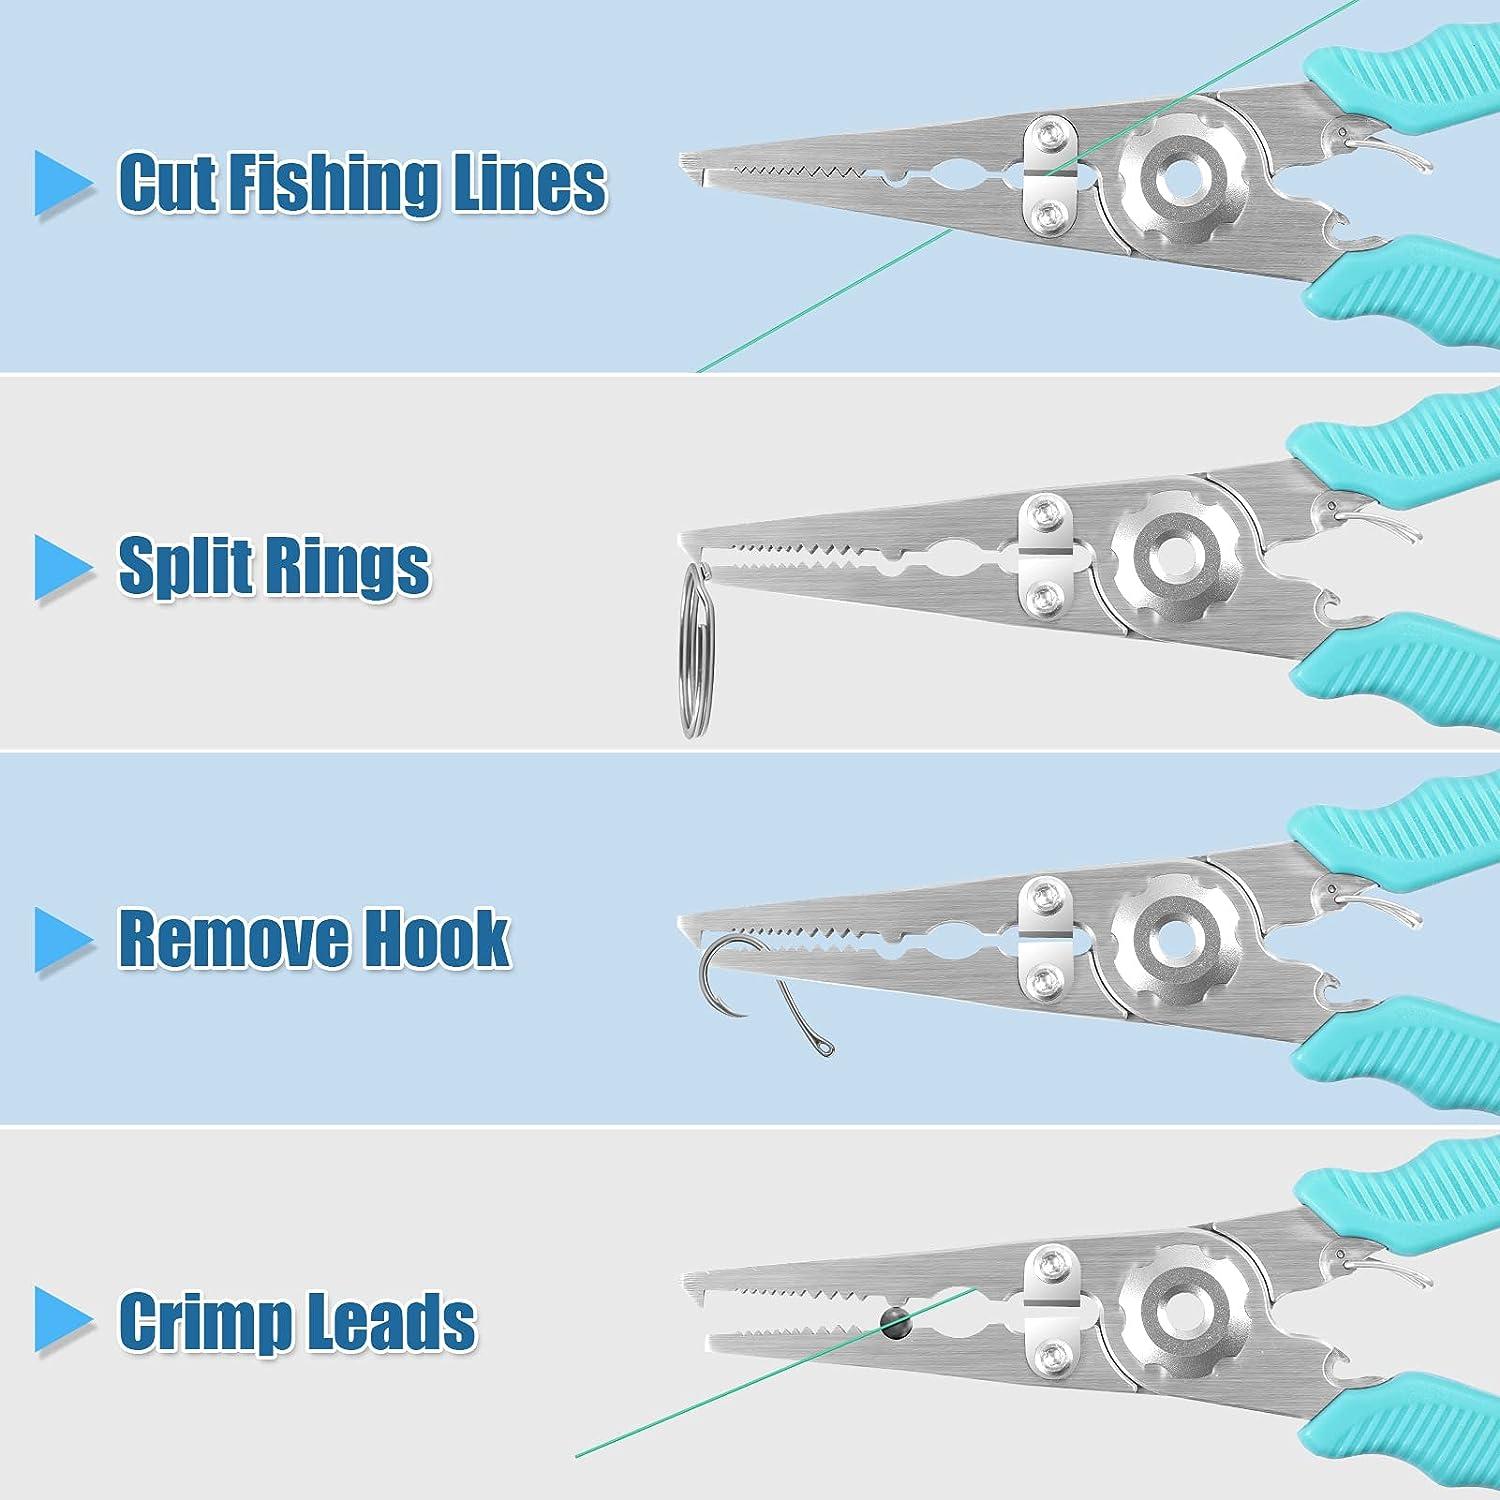 Pliers & Hook Removers, Anglers' Equipment